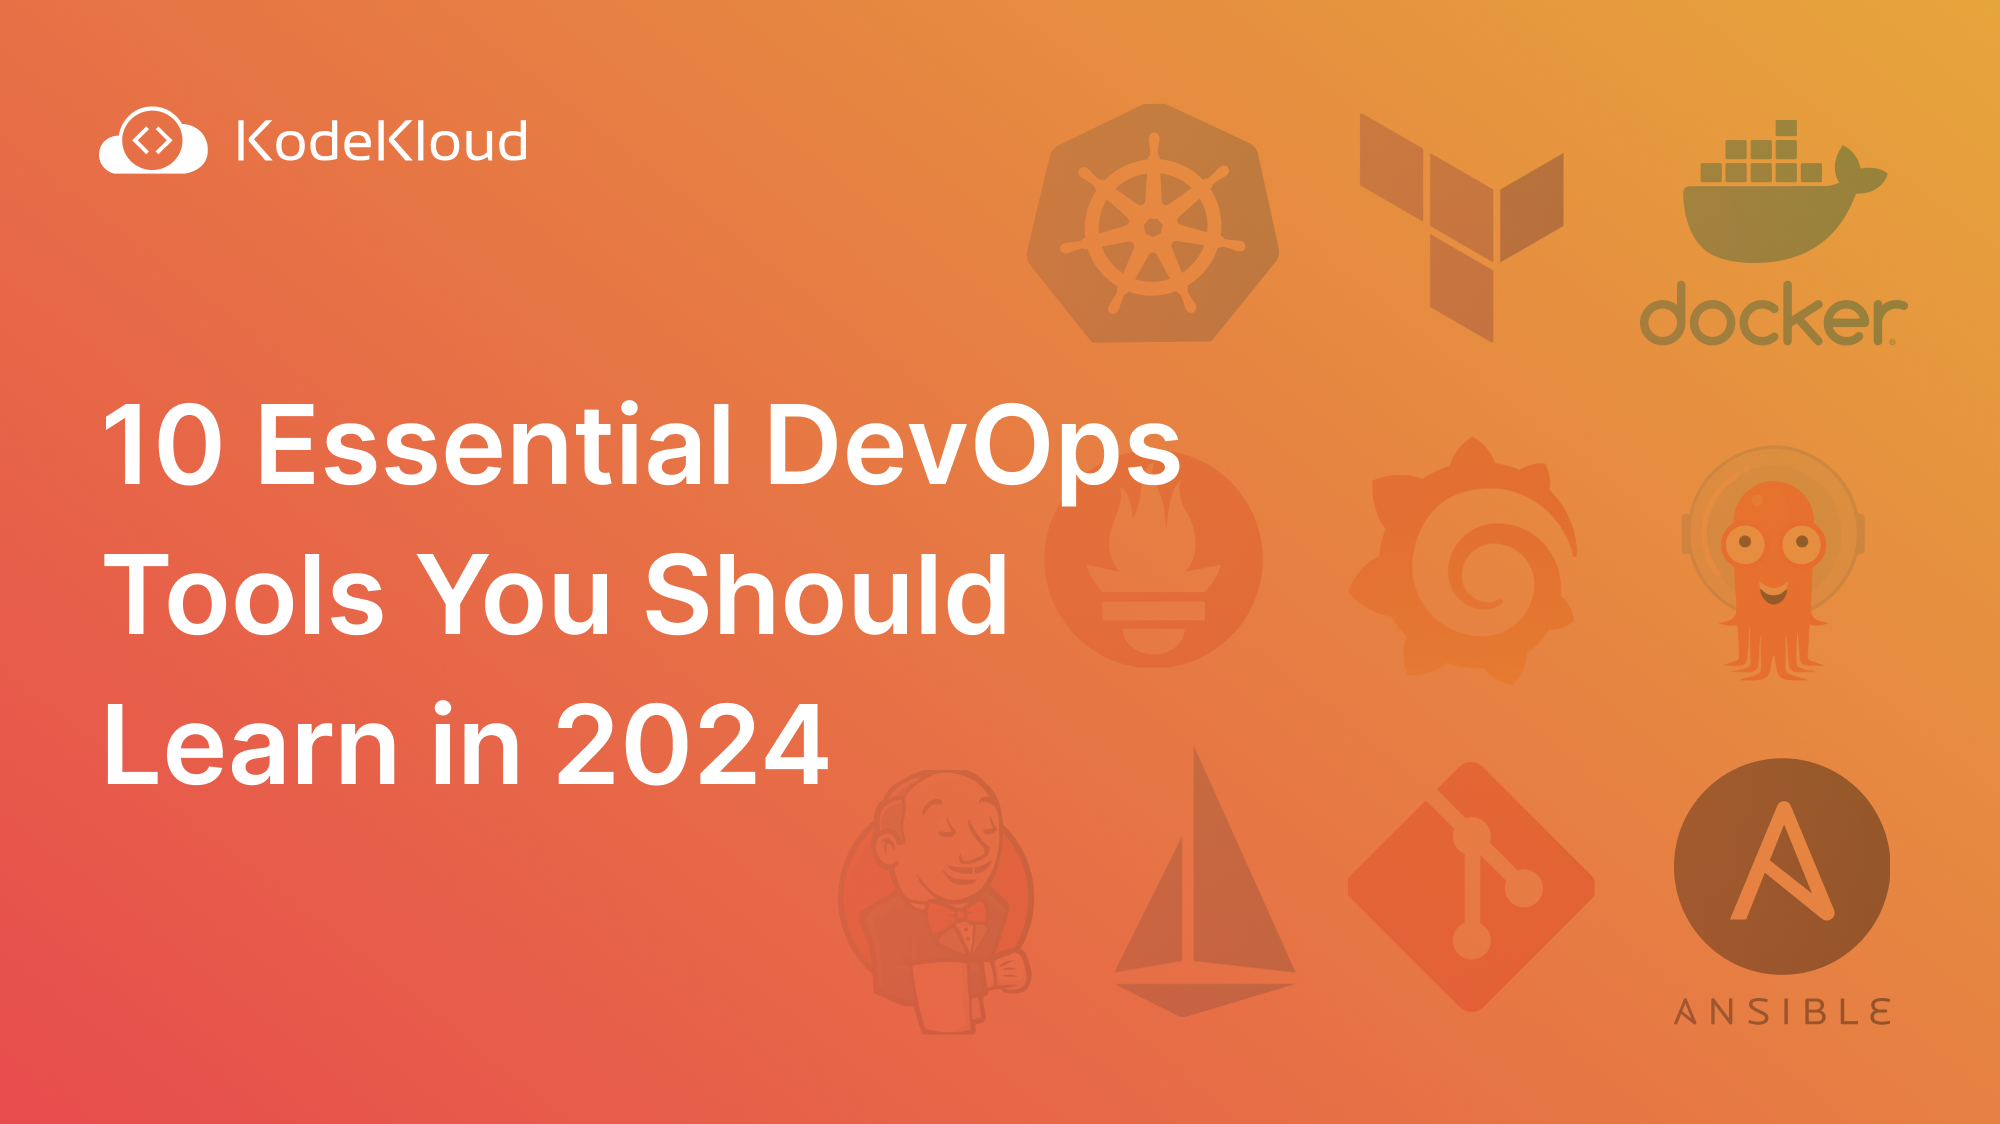 10 Essential DevOps Tools You Should Learn in 2024